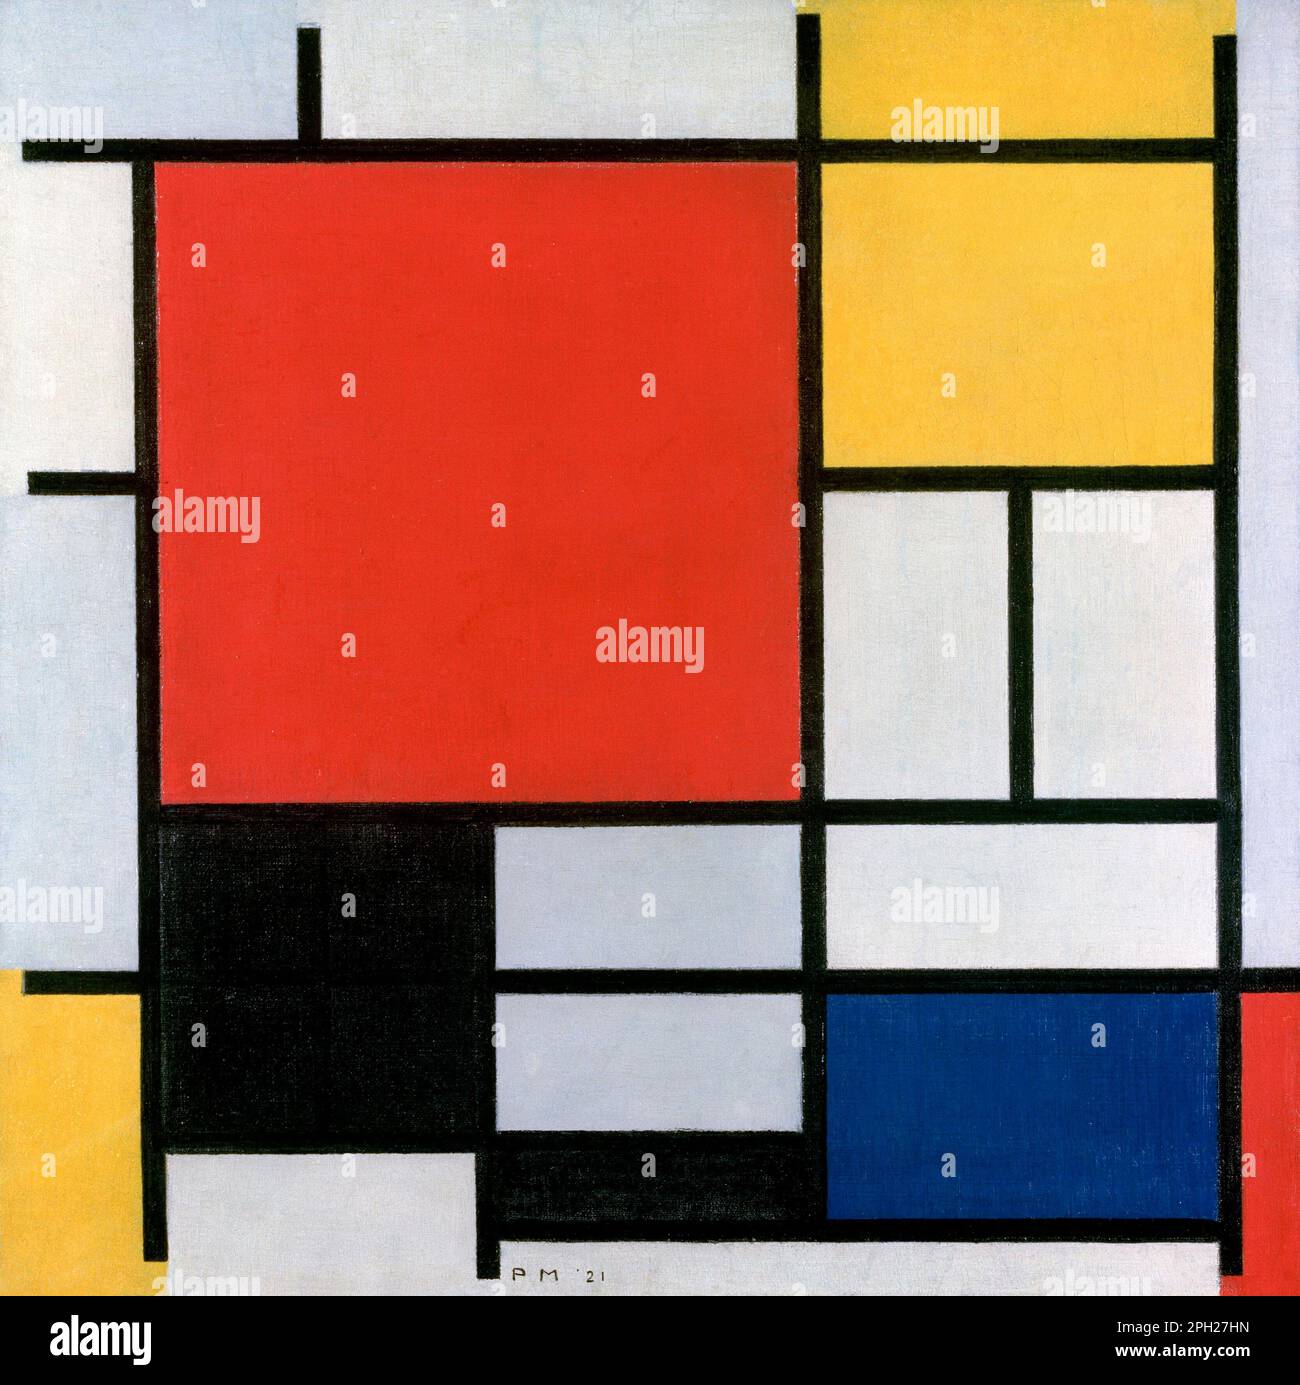 Piet Mondrian's Composition with Red, Yellow, Blue, and Black (1921) famous painting. Stock Photo